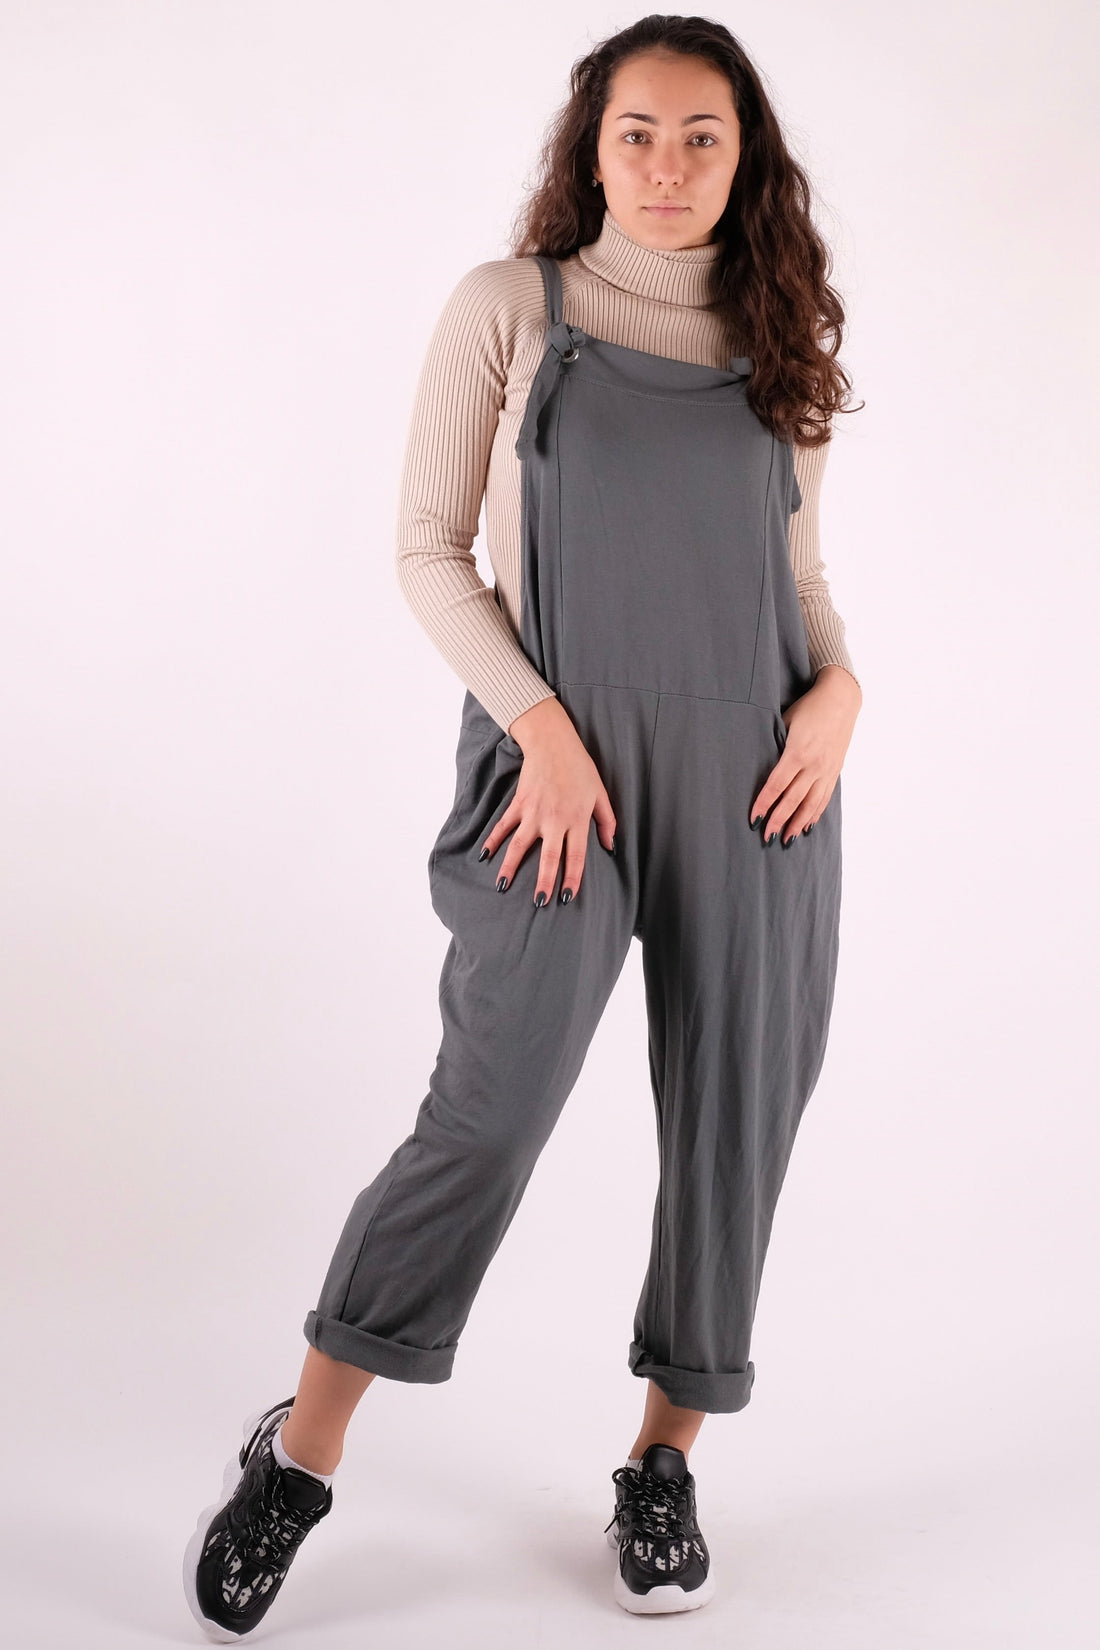 Plain Dungarees 3/4 Length With Chrome Loop Hole - Pinstripe